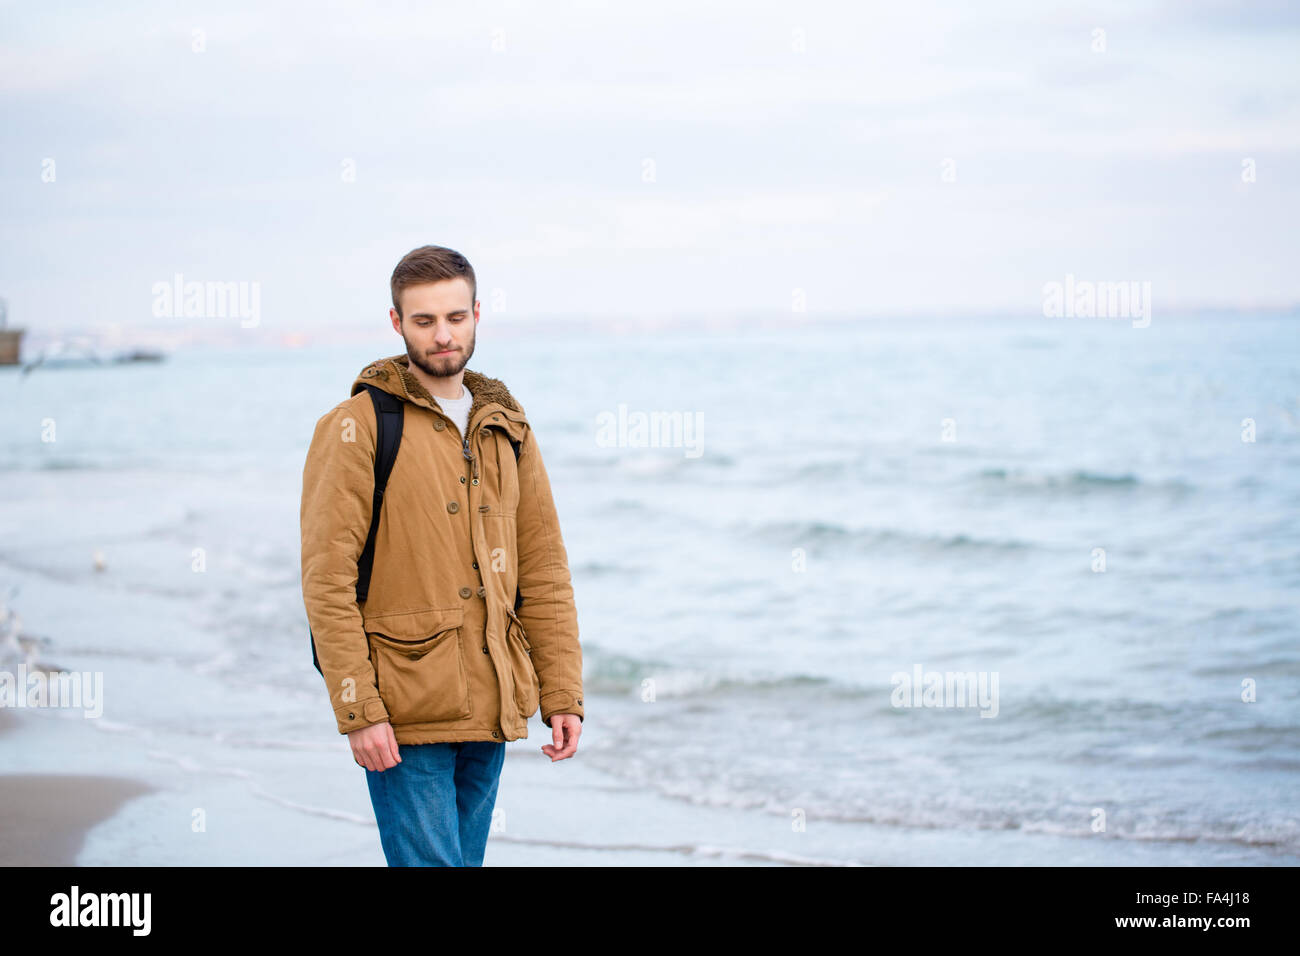 Portrait of a young man standing at the beach Banque D'Images